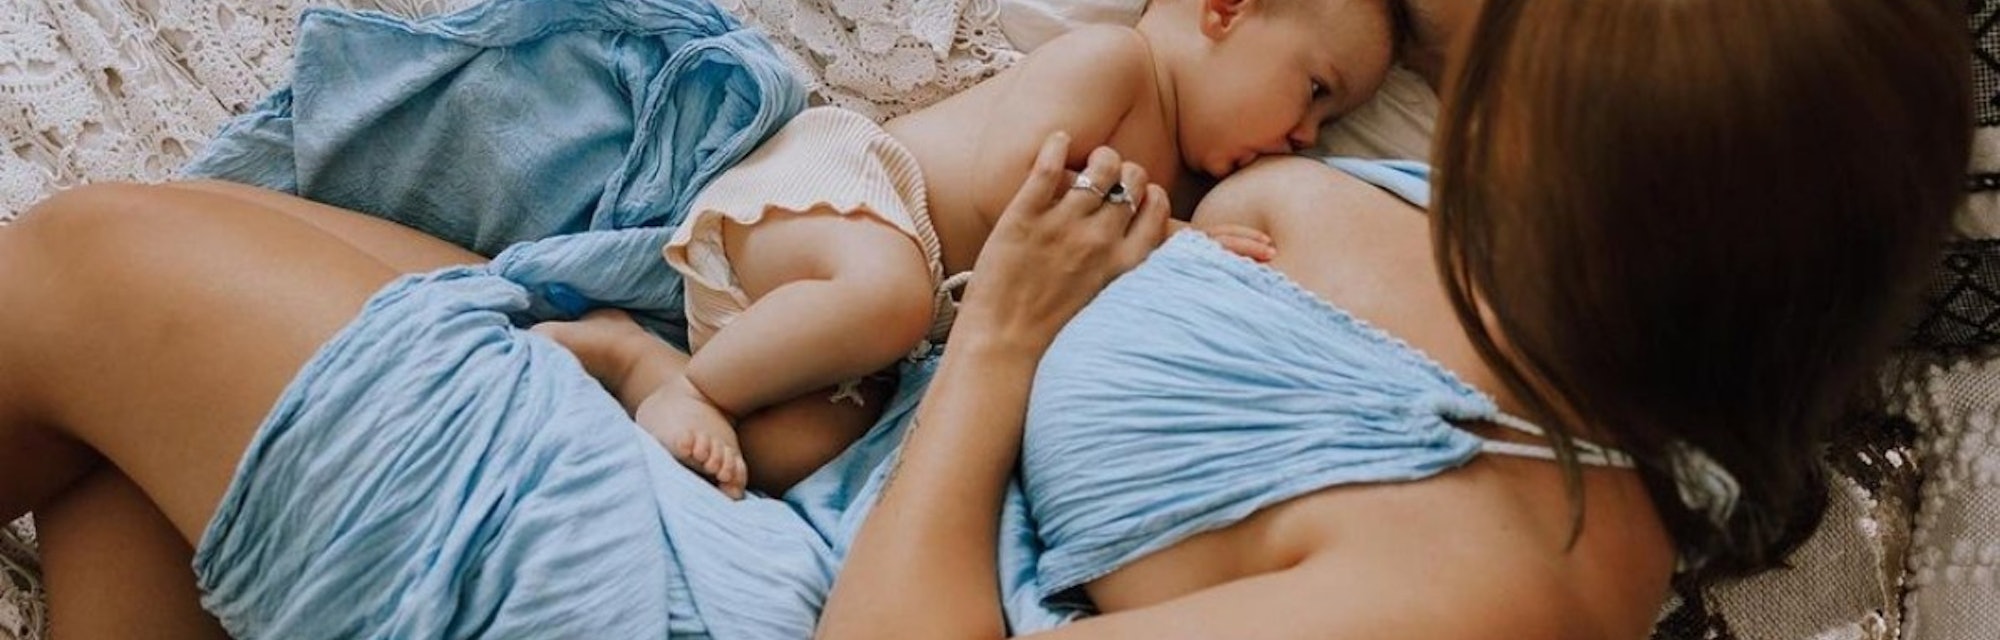 breastfeeding photoshoot ideas of mom and baby laying down